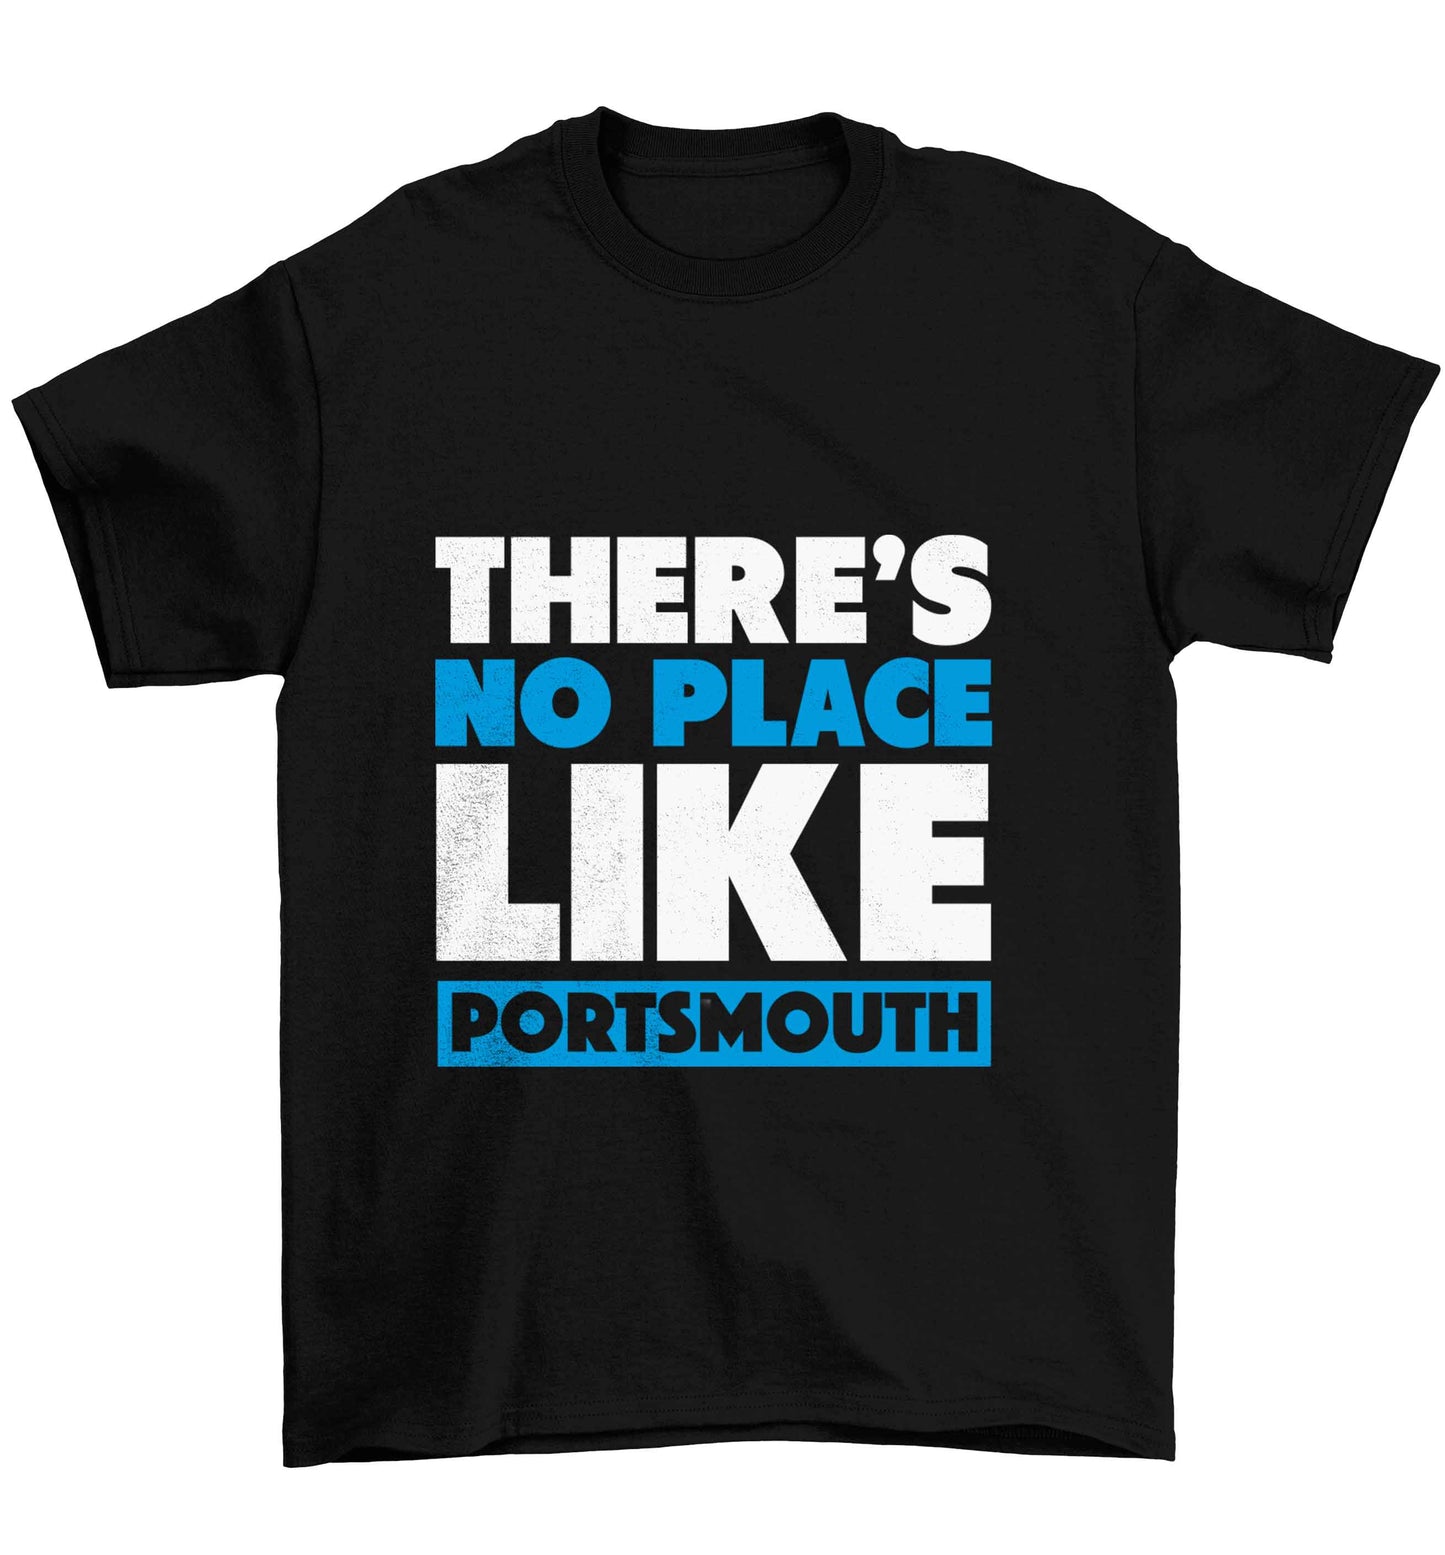 There's no place like Porstmouth Children's black Tshirt 12-13 Years